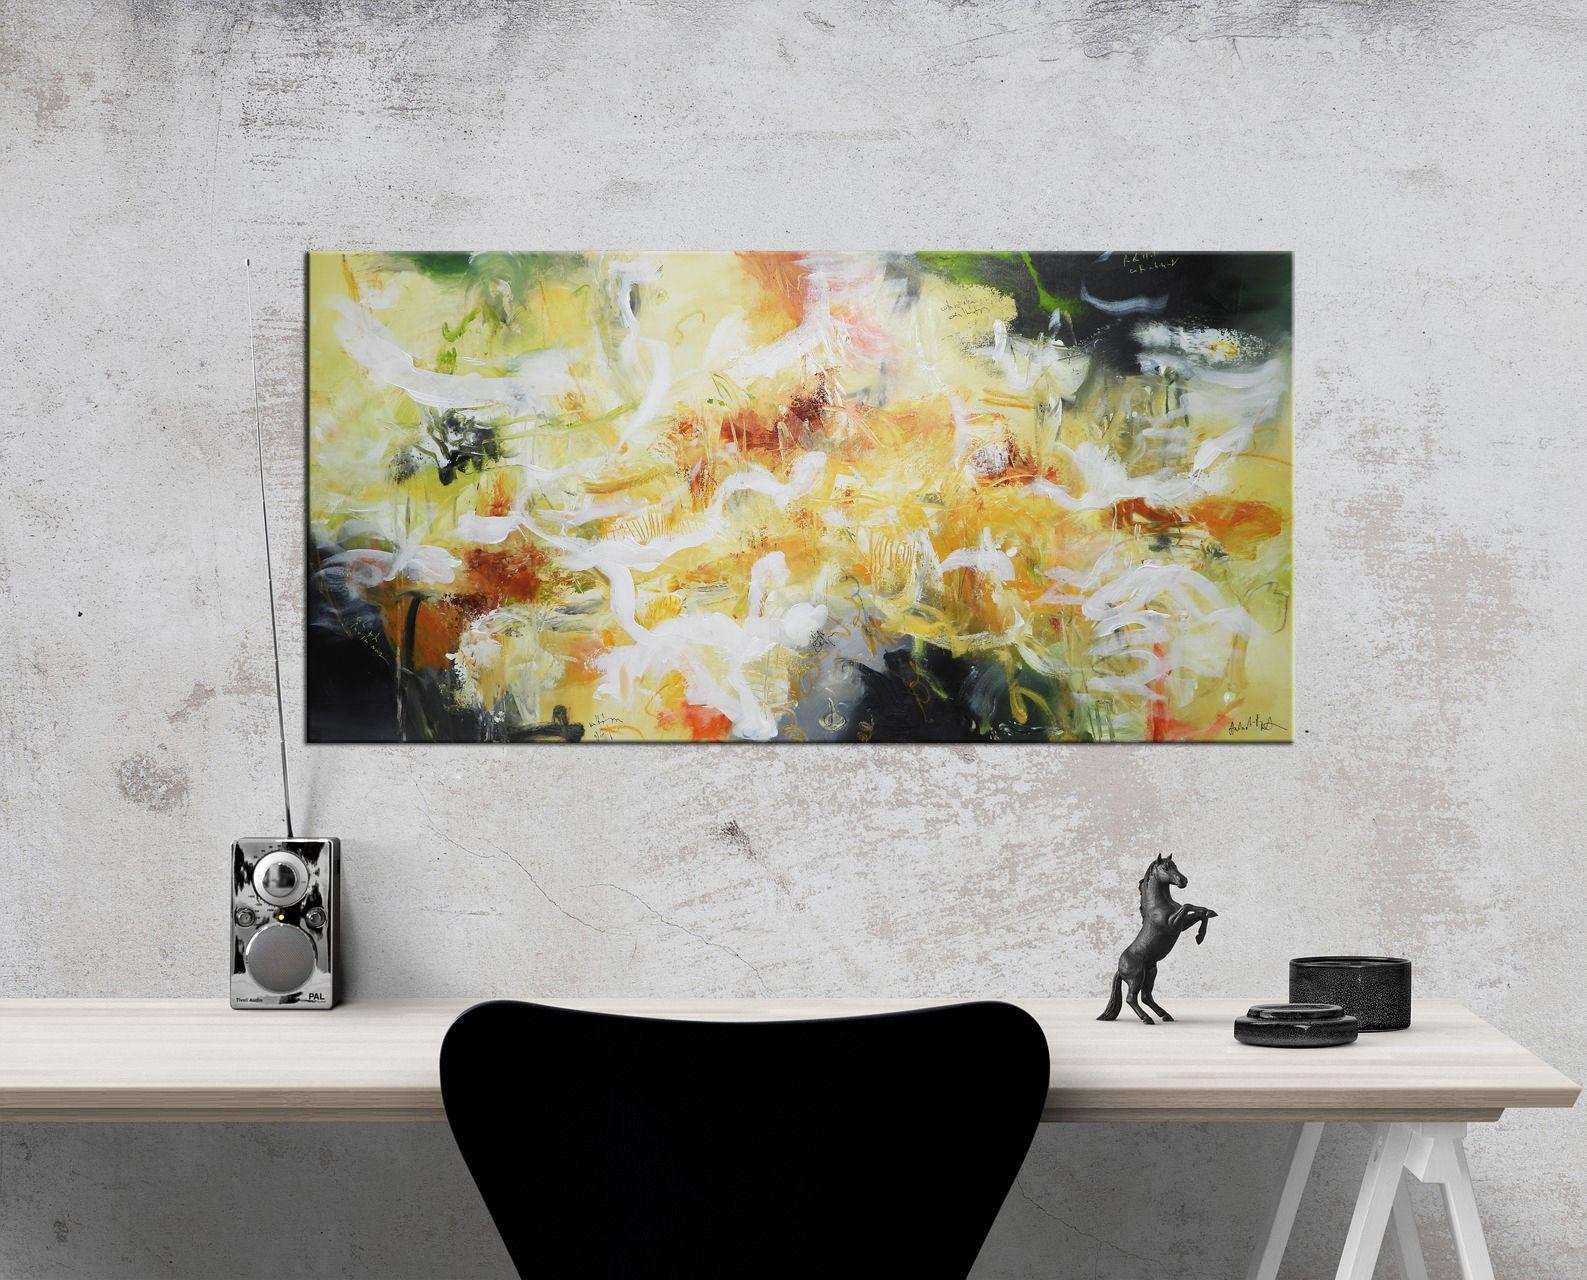 Beautiful large abstract painting with yellow, green and orange rust, great conversation starter.  - Title: Yellow blossom  - Medium: Mixed media  - Support: canvas, ready to hang  - Size: 24